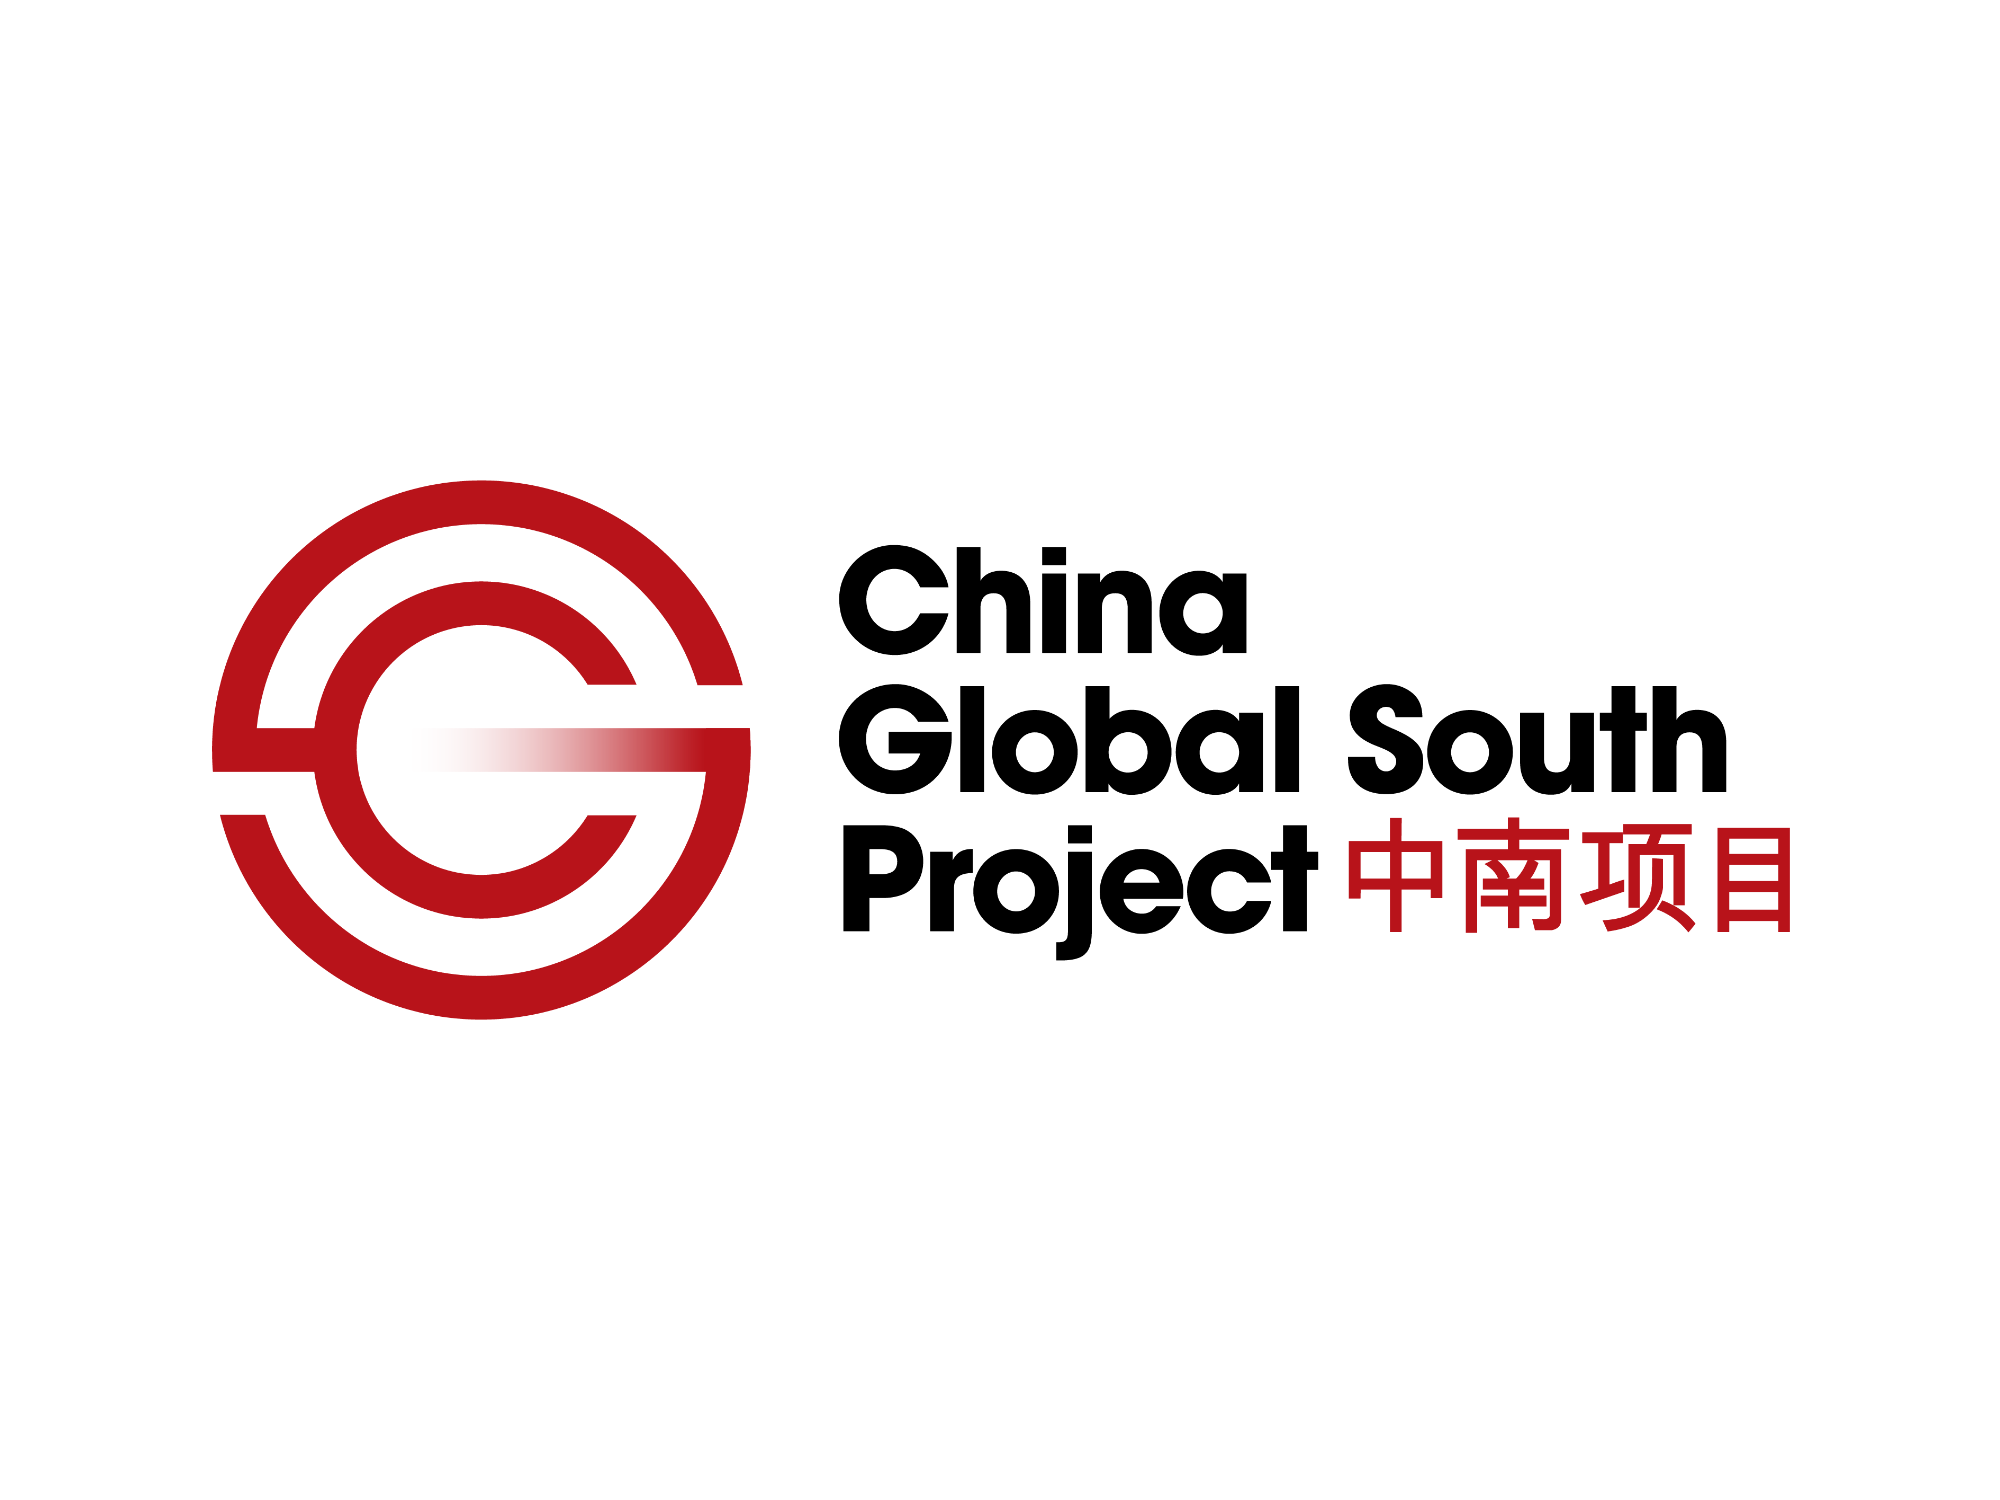 China Global South Project